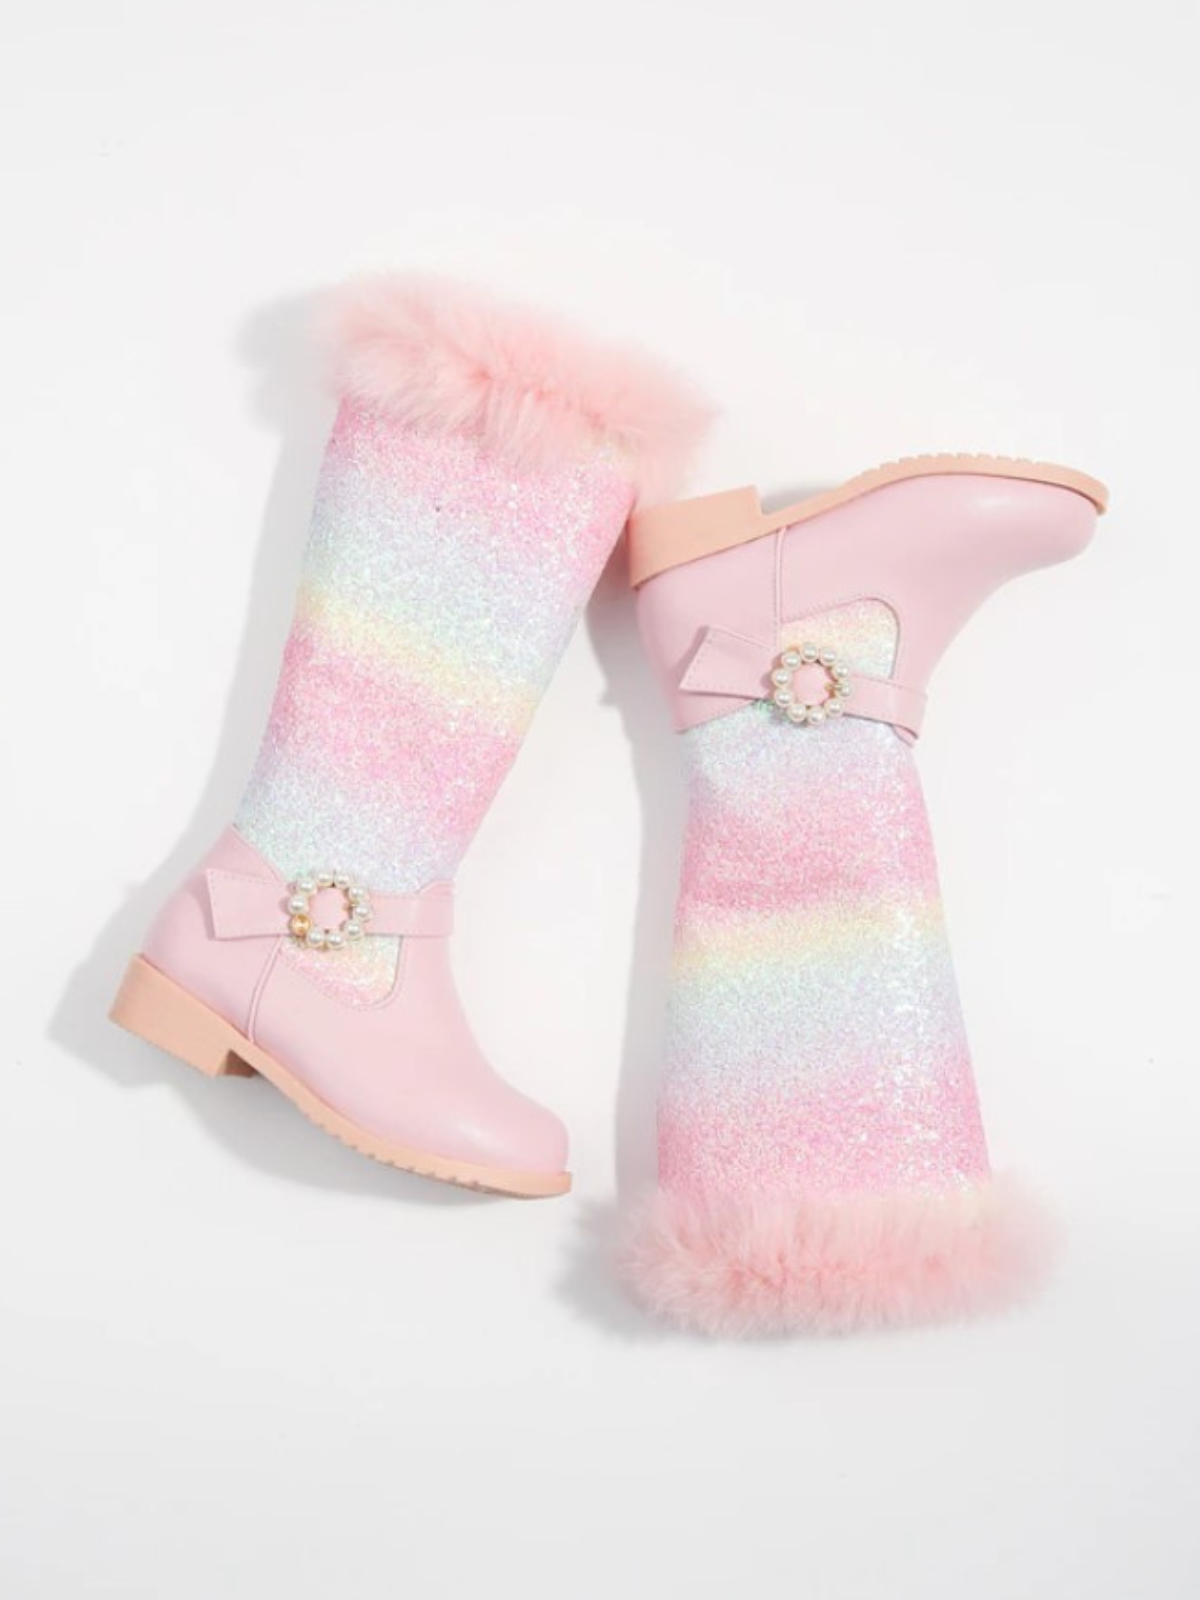 Mia Belle Girls Glitter Rainbow Boots | Shoes By Liv & Mia